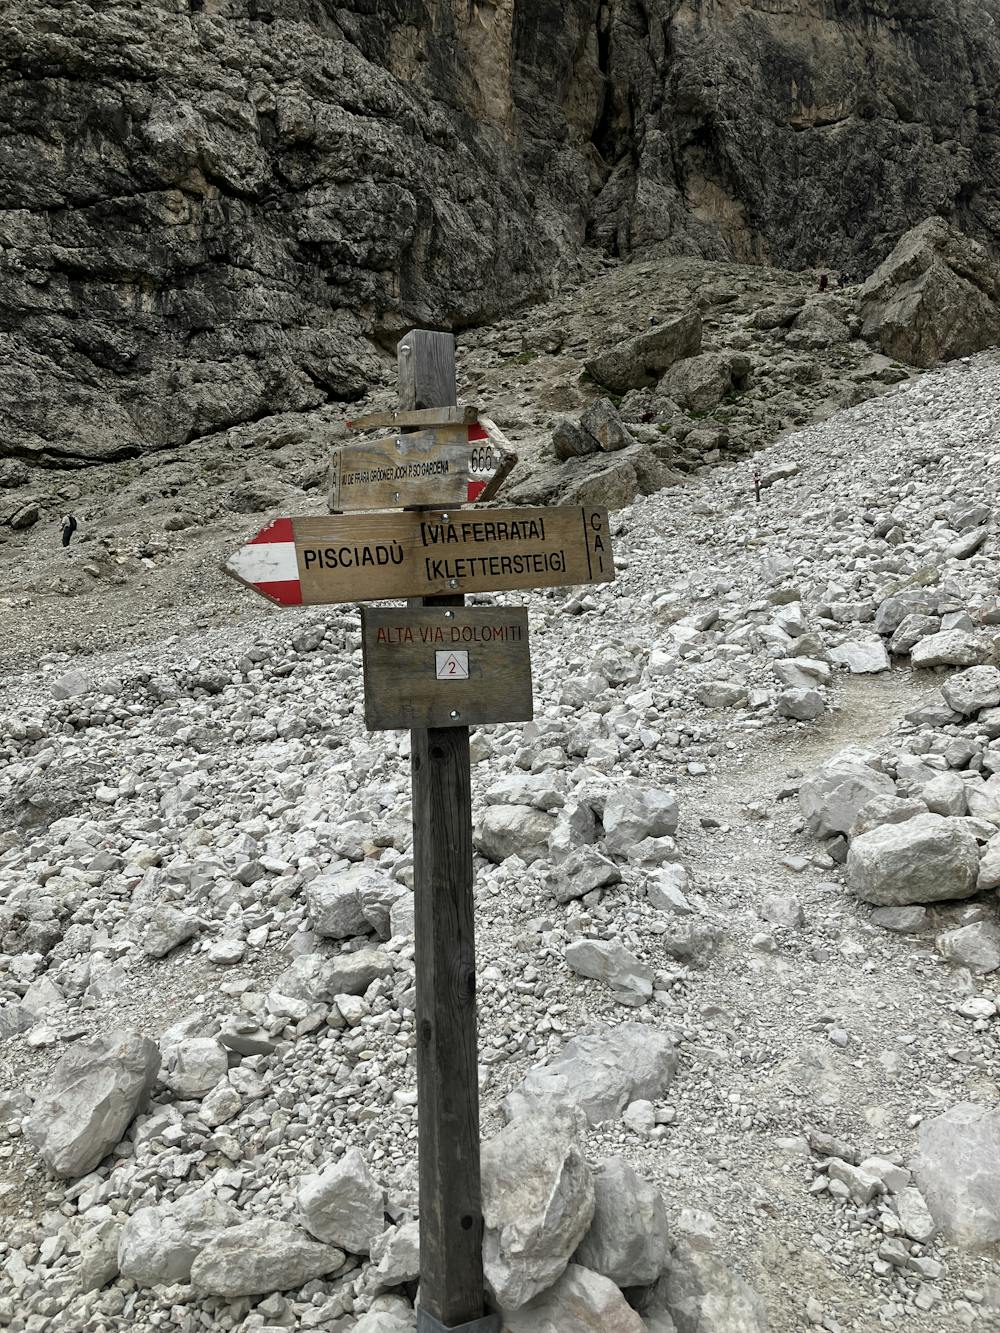 Turn right here for the hiking path up to Rif. Pisciadu, turn left for the via ferrata